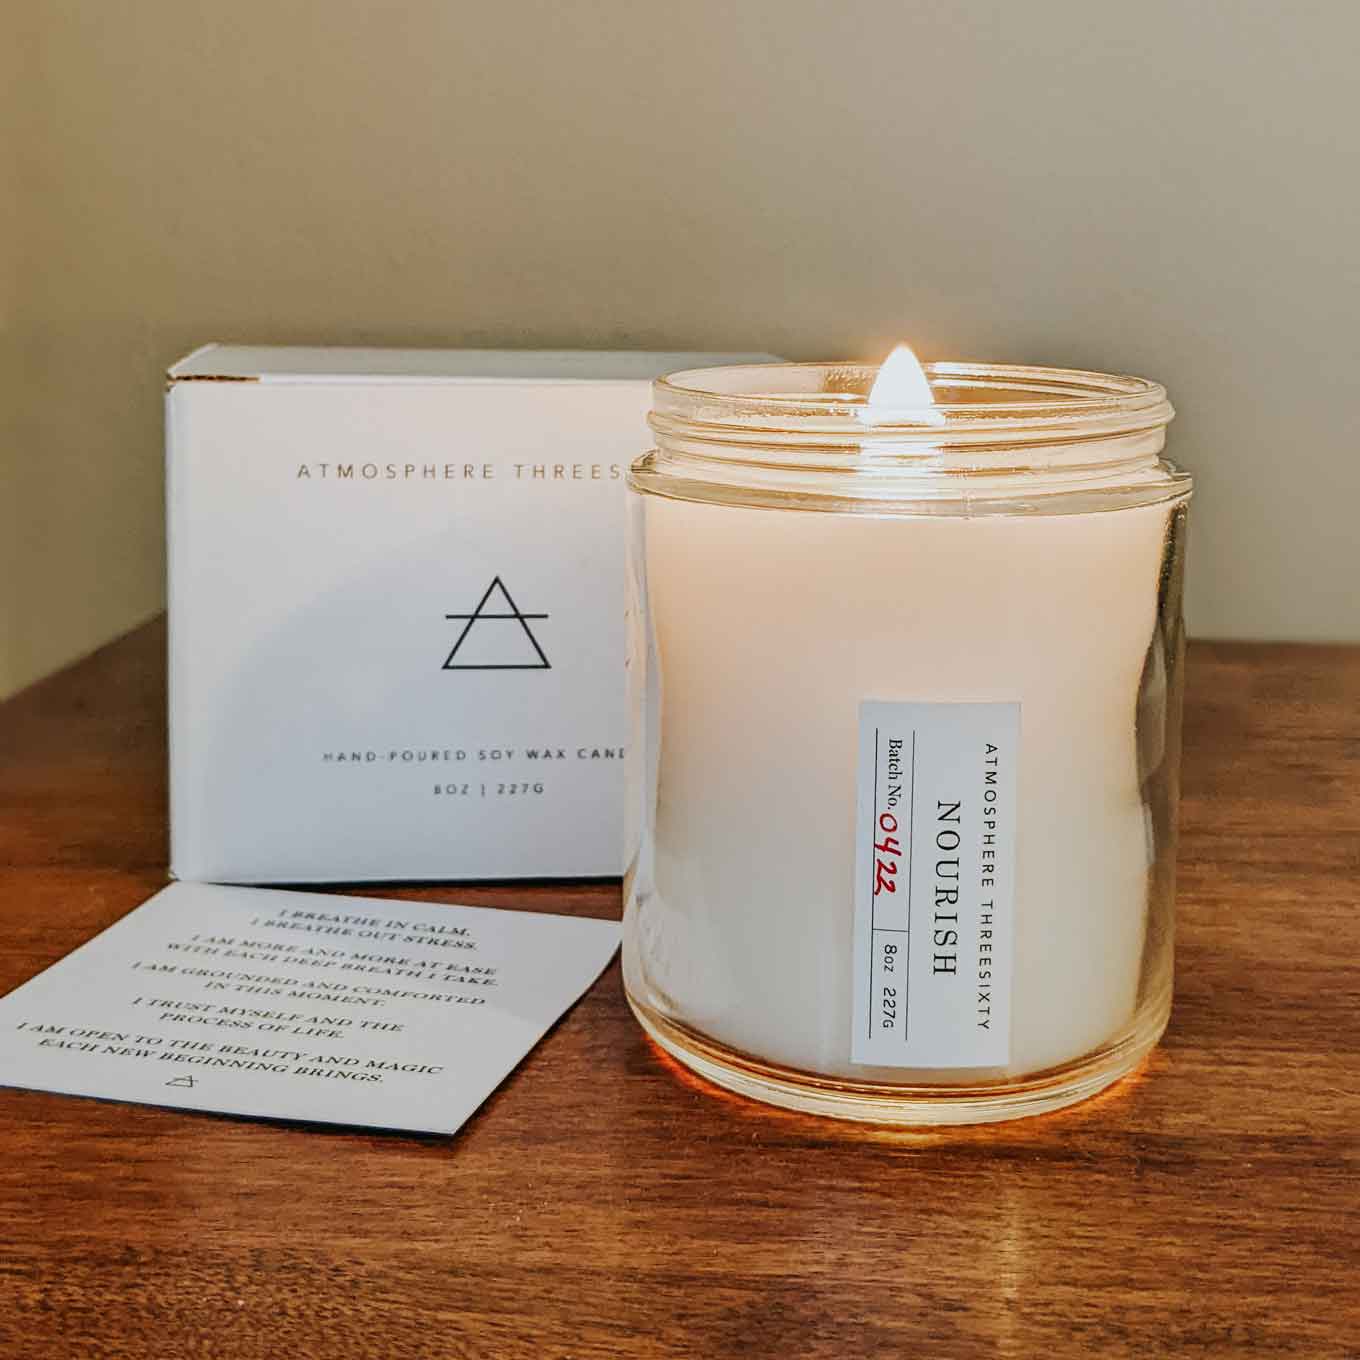 Atmosphere Threesixty glass candle that says Nourish, with its packaging behind it